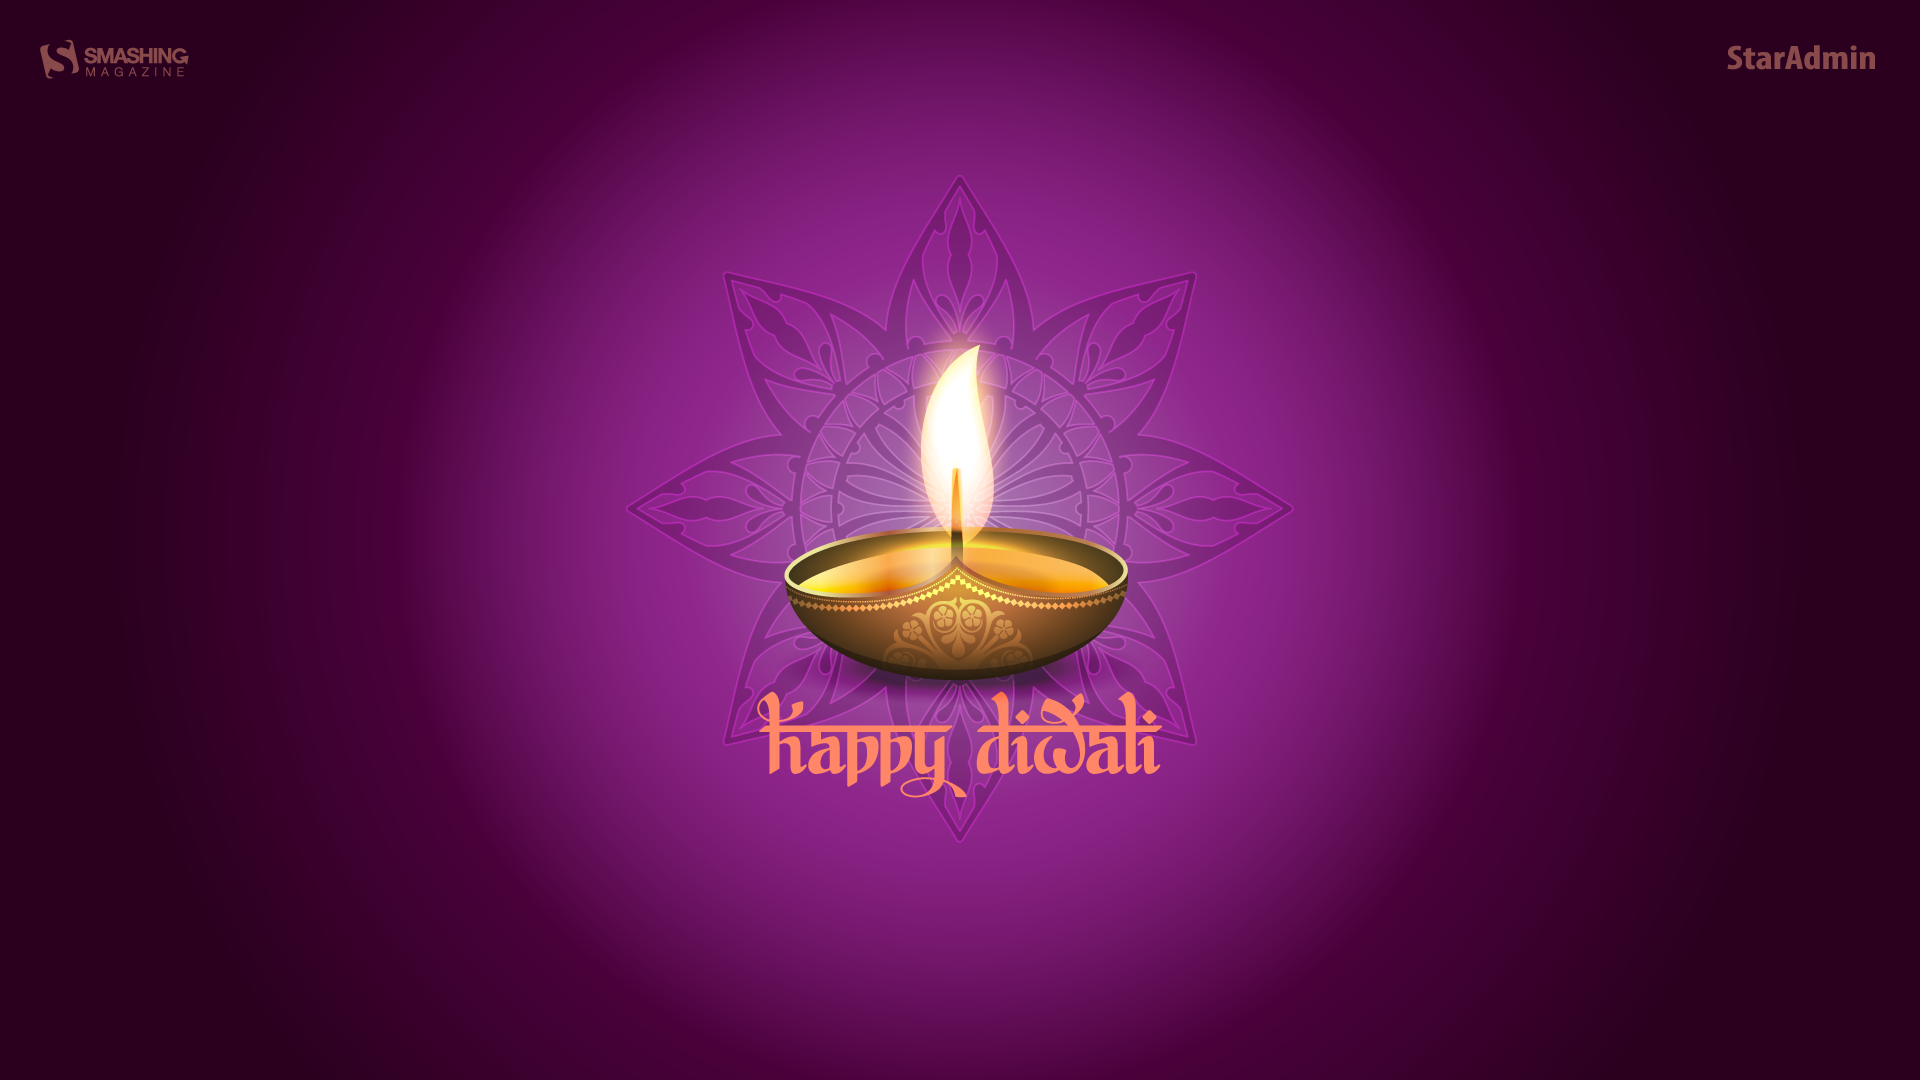 Download Free happy Diwali Image Picture & Photo